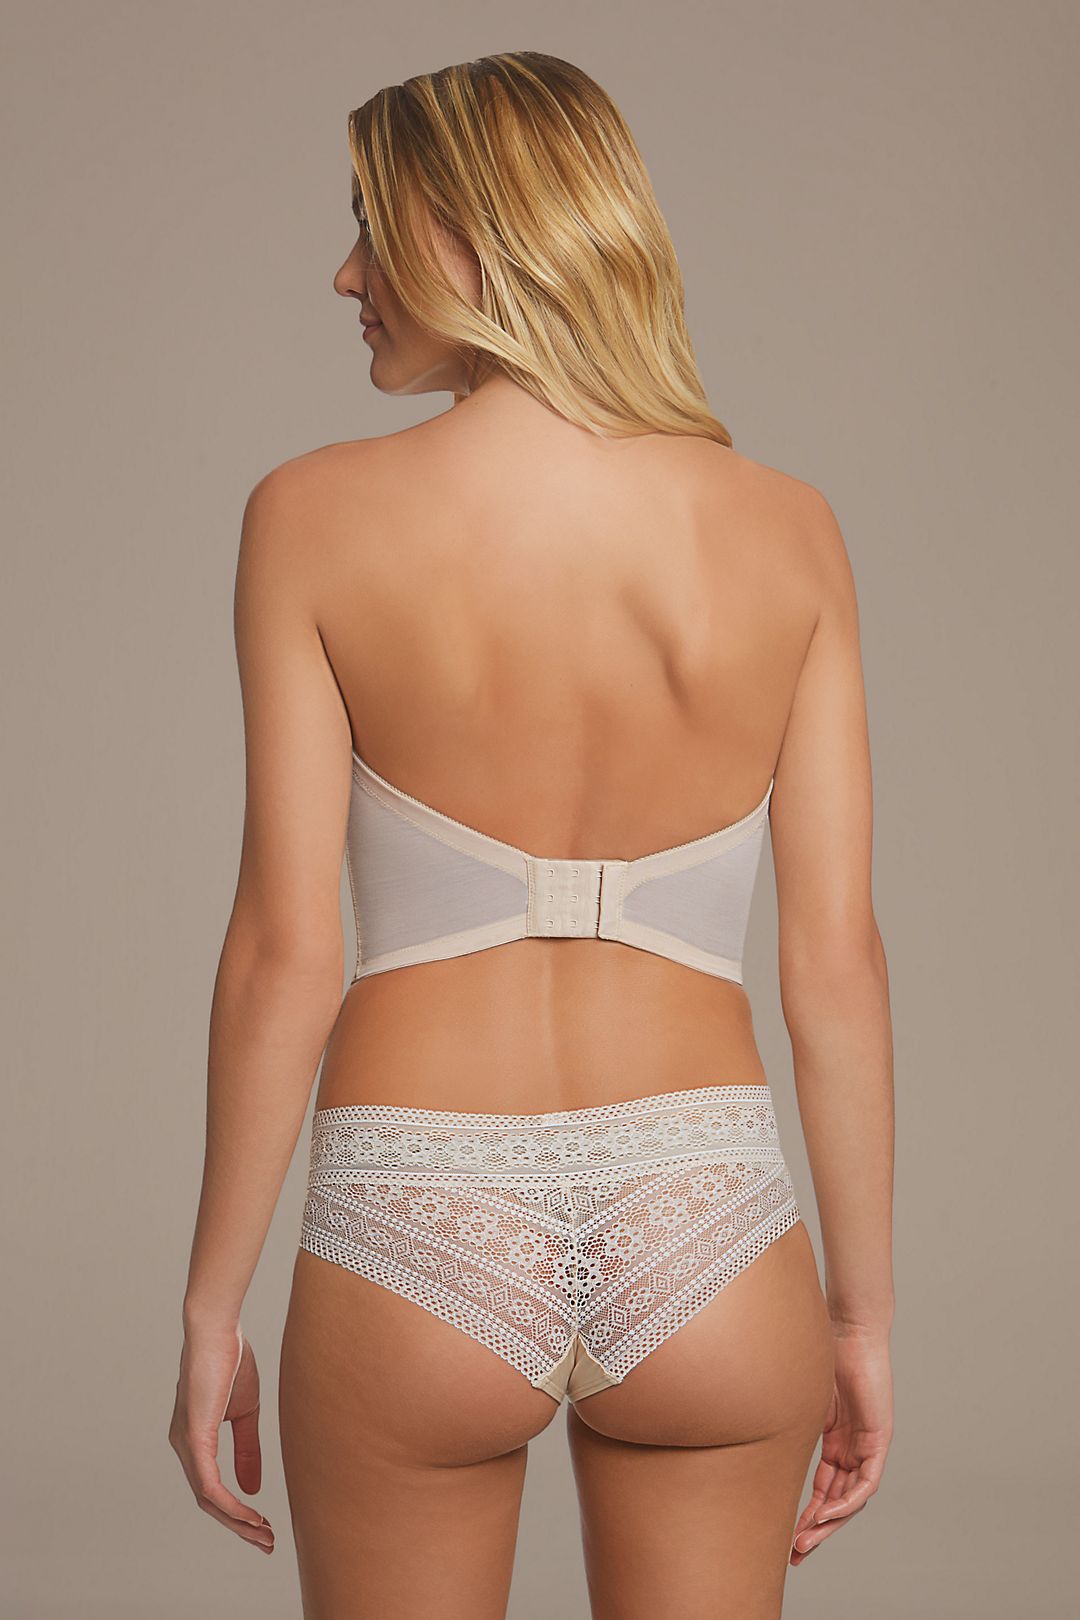 Dominique Tayler Backless Strapless Bra in Beige - Busted Bra Shop